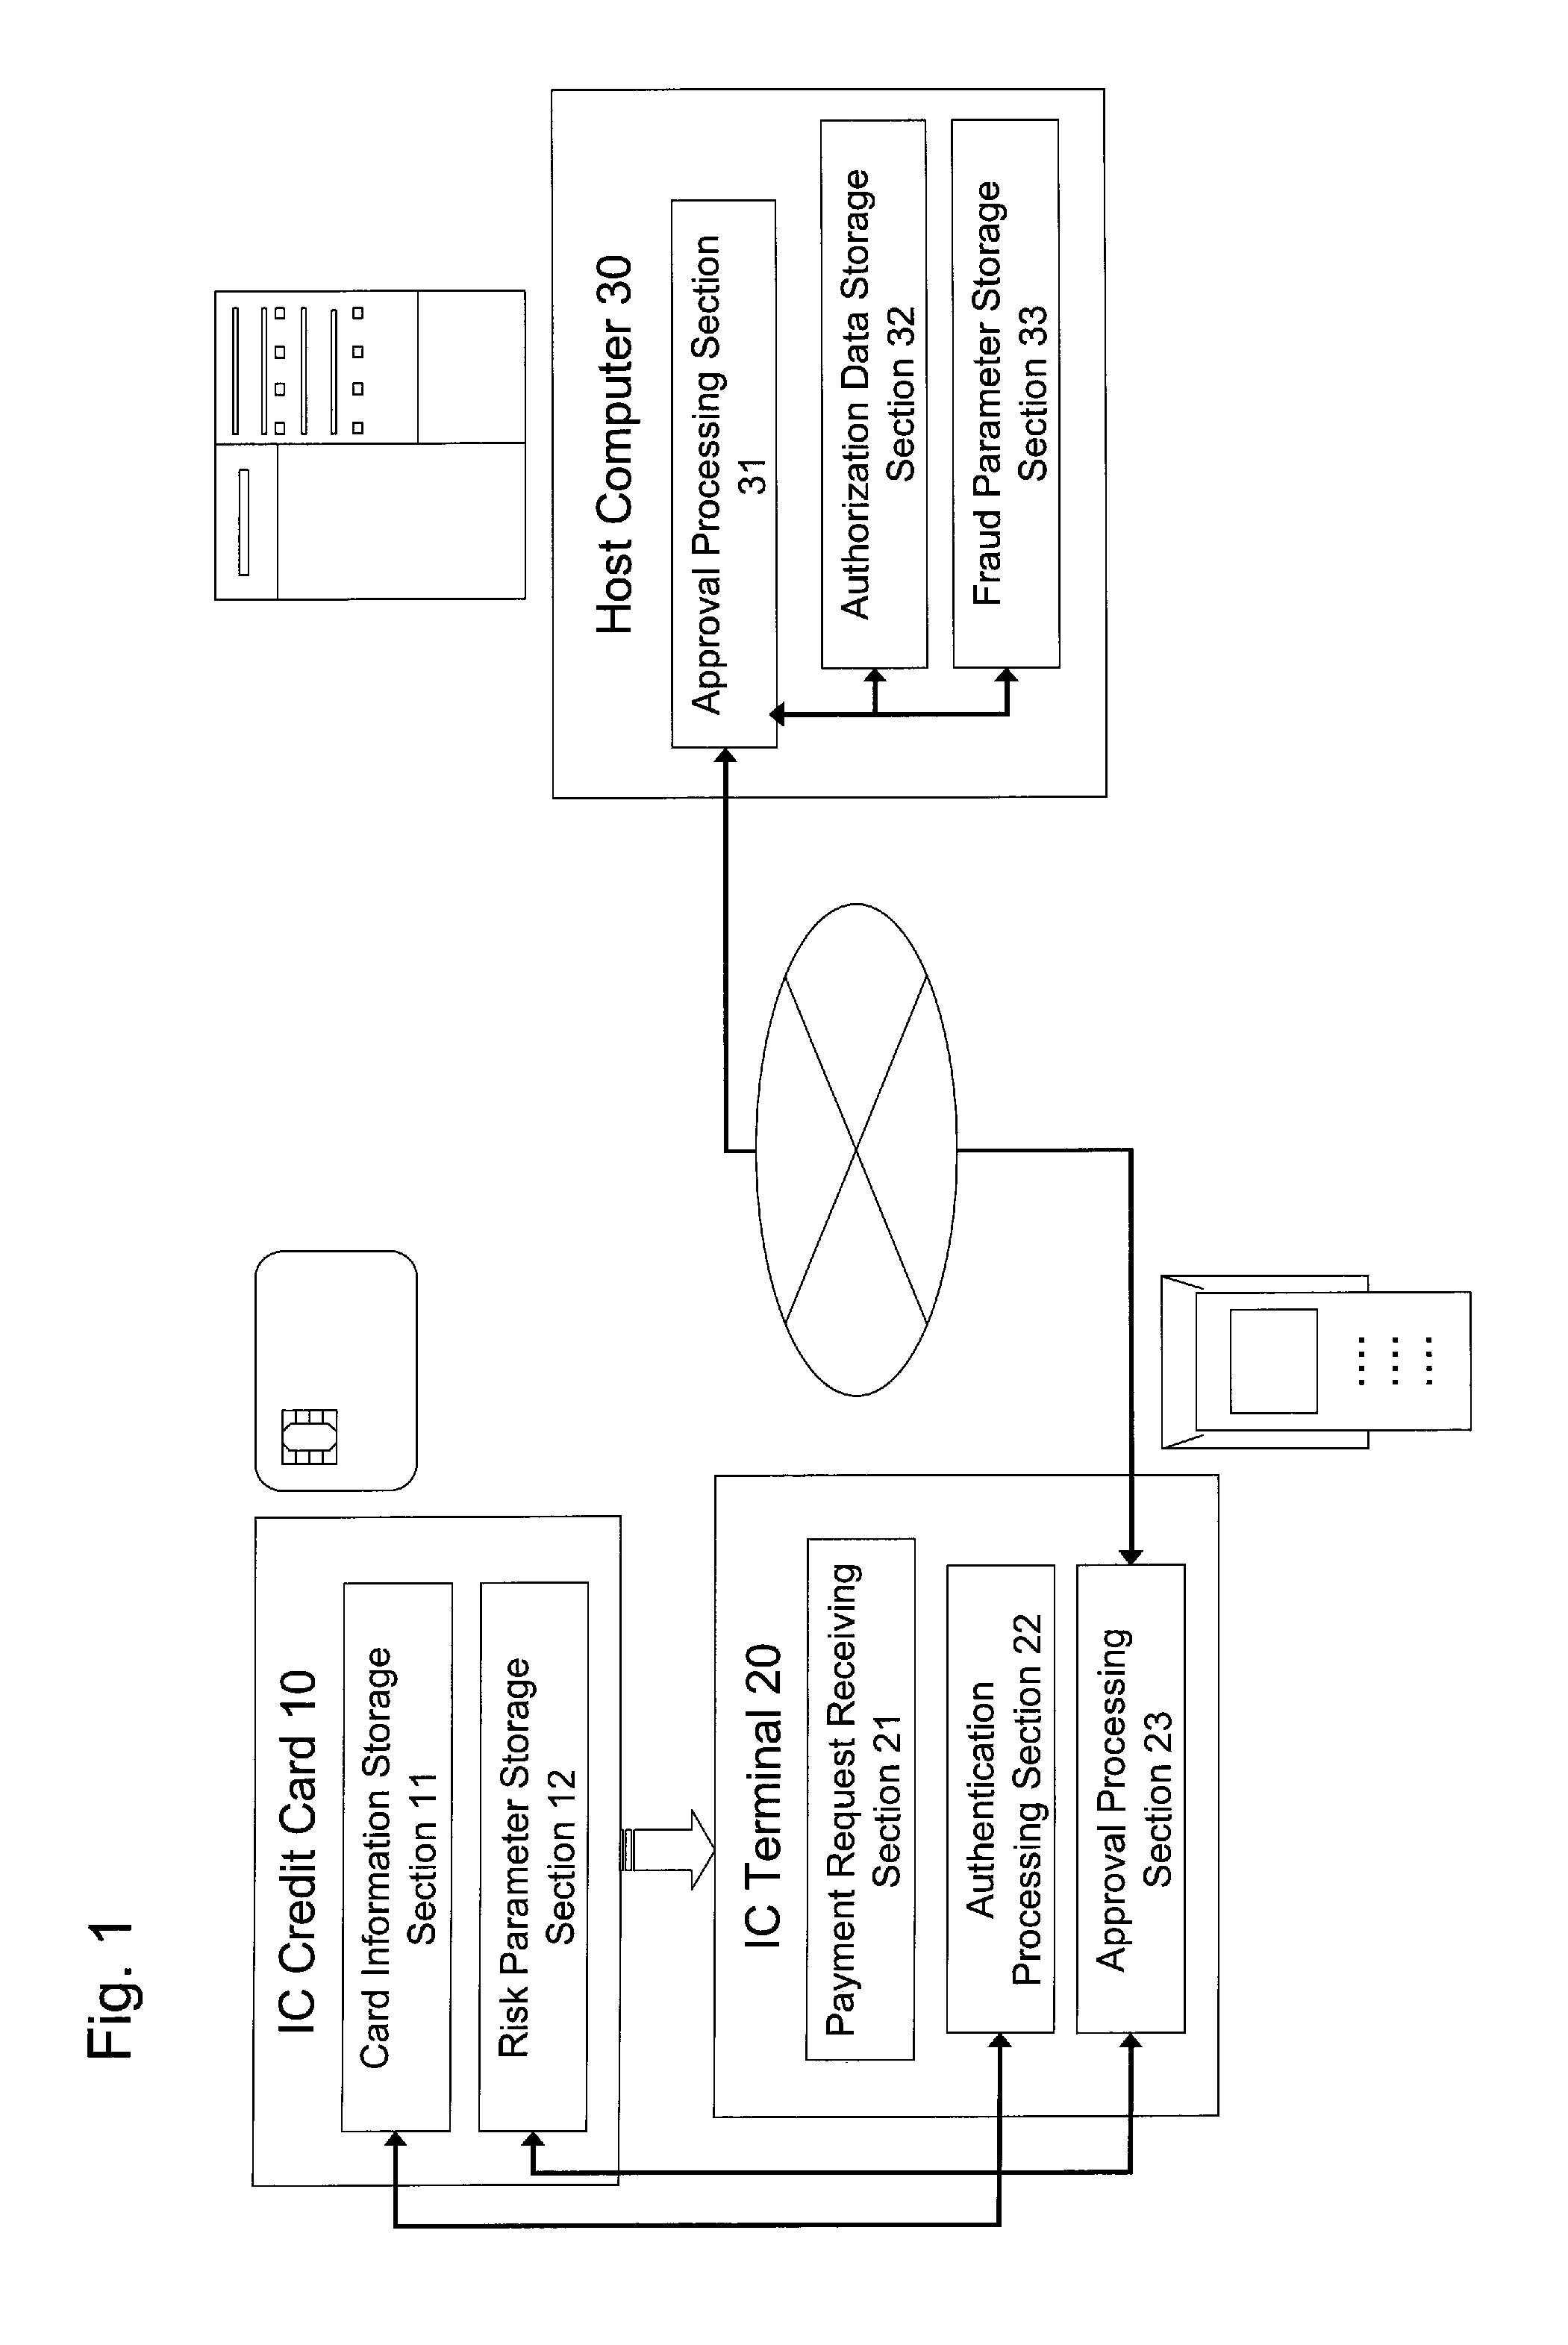 Payment approval system and method for approving payment for credit card